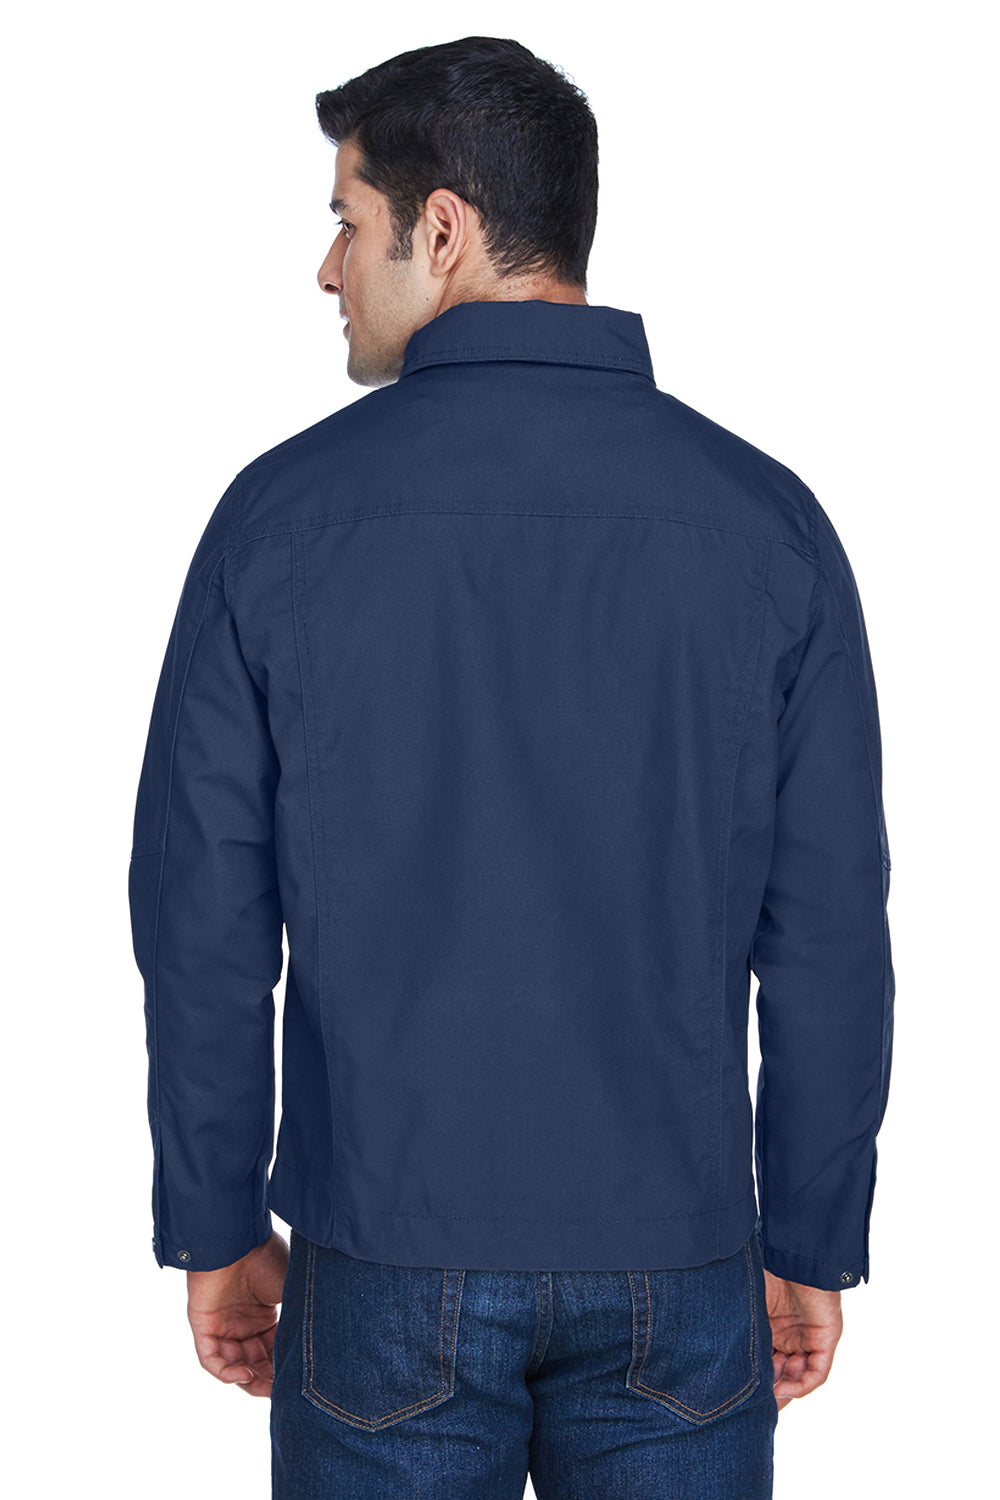 Harriton M705 Mens Auxiliary Water Resistant Canvas Full Zip Jacket Navy Blue Back